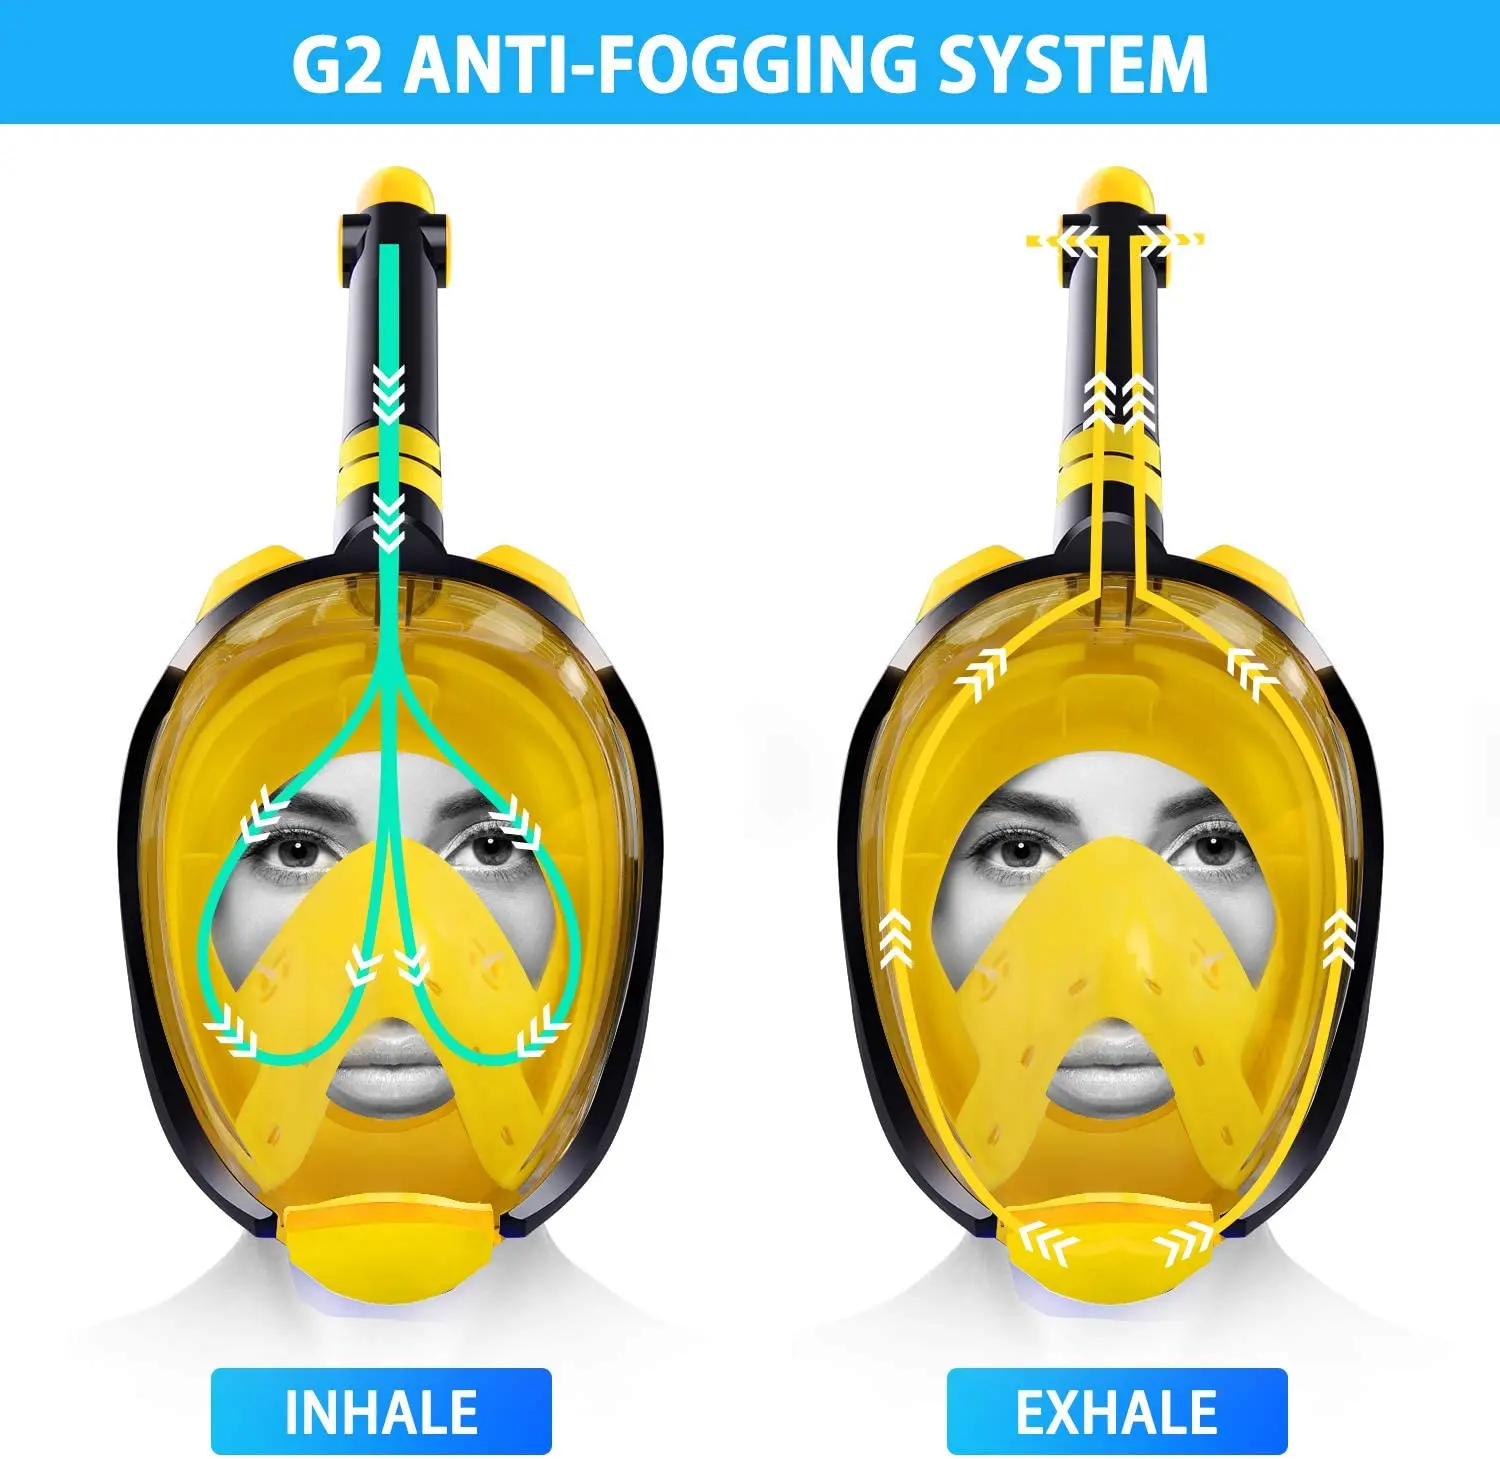 2021 Full Face Snorkel Mask 180 Degre Adjustable Head Straps Diving Equipment With Go Pro Mount